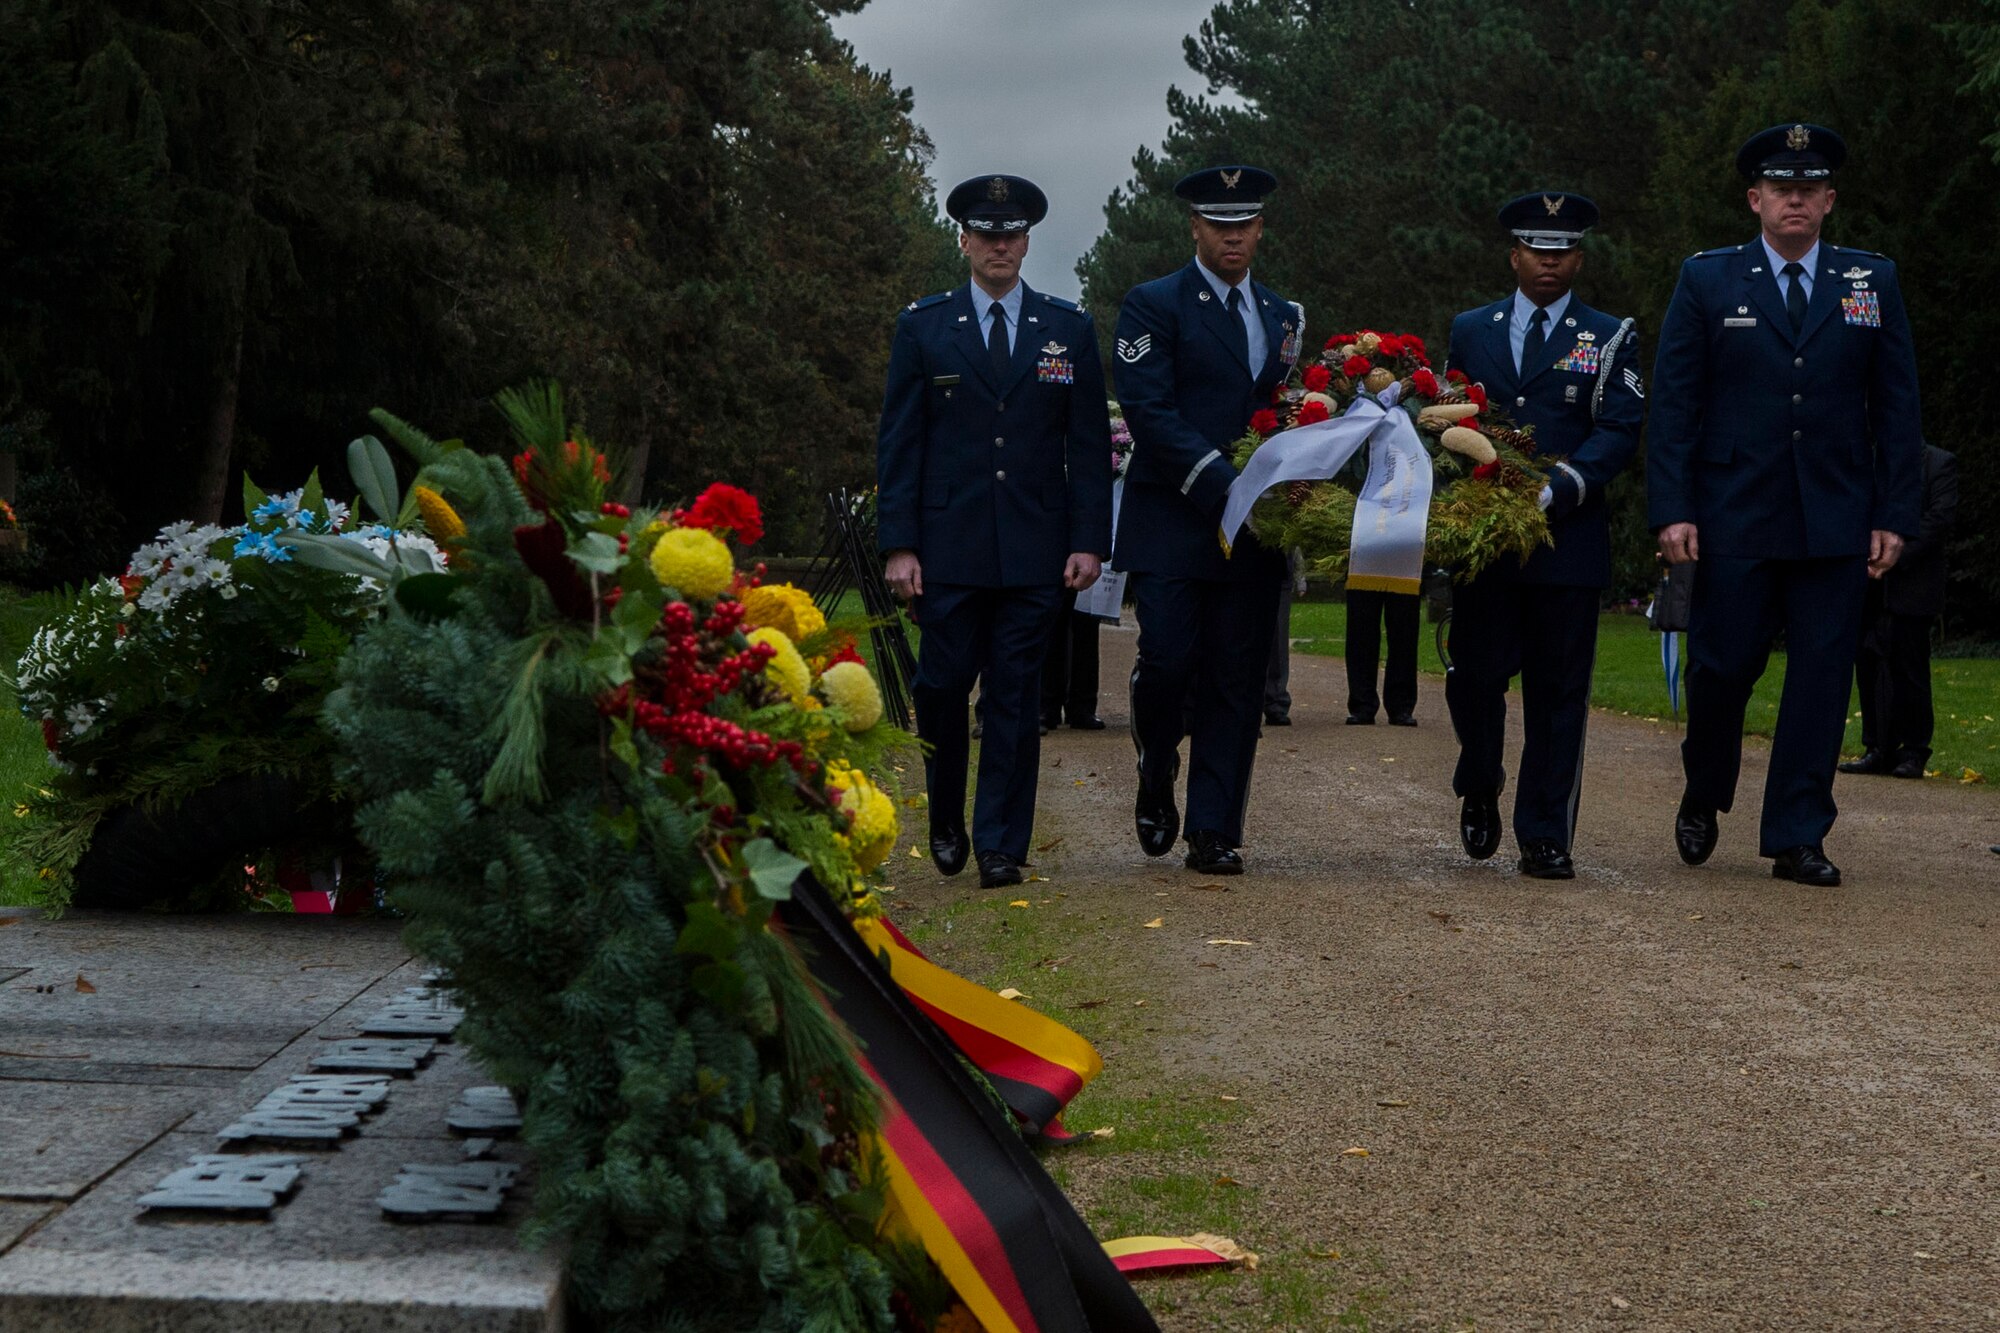 Spangdahlem Airmen prepare to lay a wreath during a National Mourning Day ceremony at a cemetery in Trier, Germany, Nov. 15, 2015. Germany’s National Mourning Day is day for mourning the victims of the two world wars, those who lost their lives during current operations, and ones still missing in action. (U.S. Air Force photo by Airman 1st Class Luke Kitterman/Released)